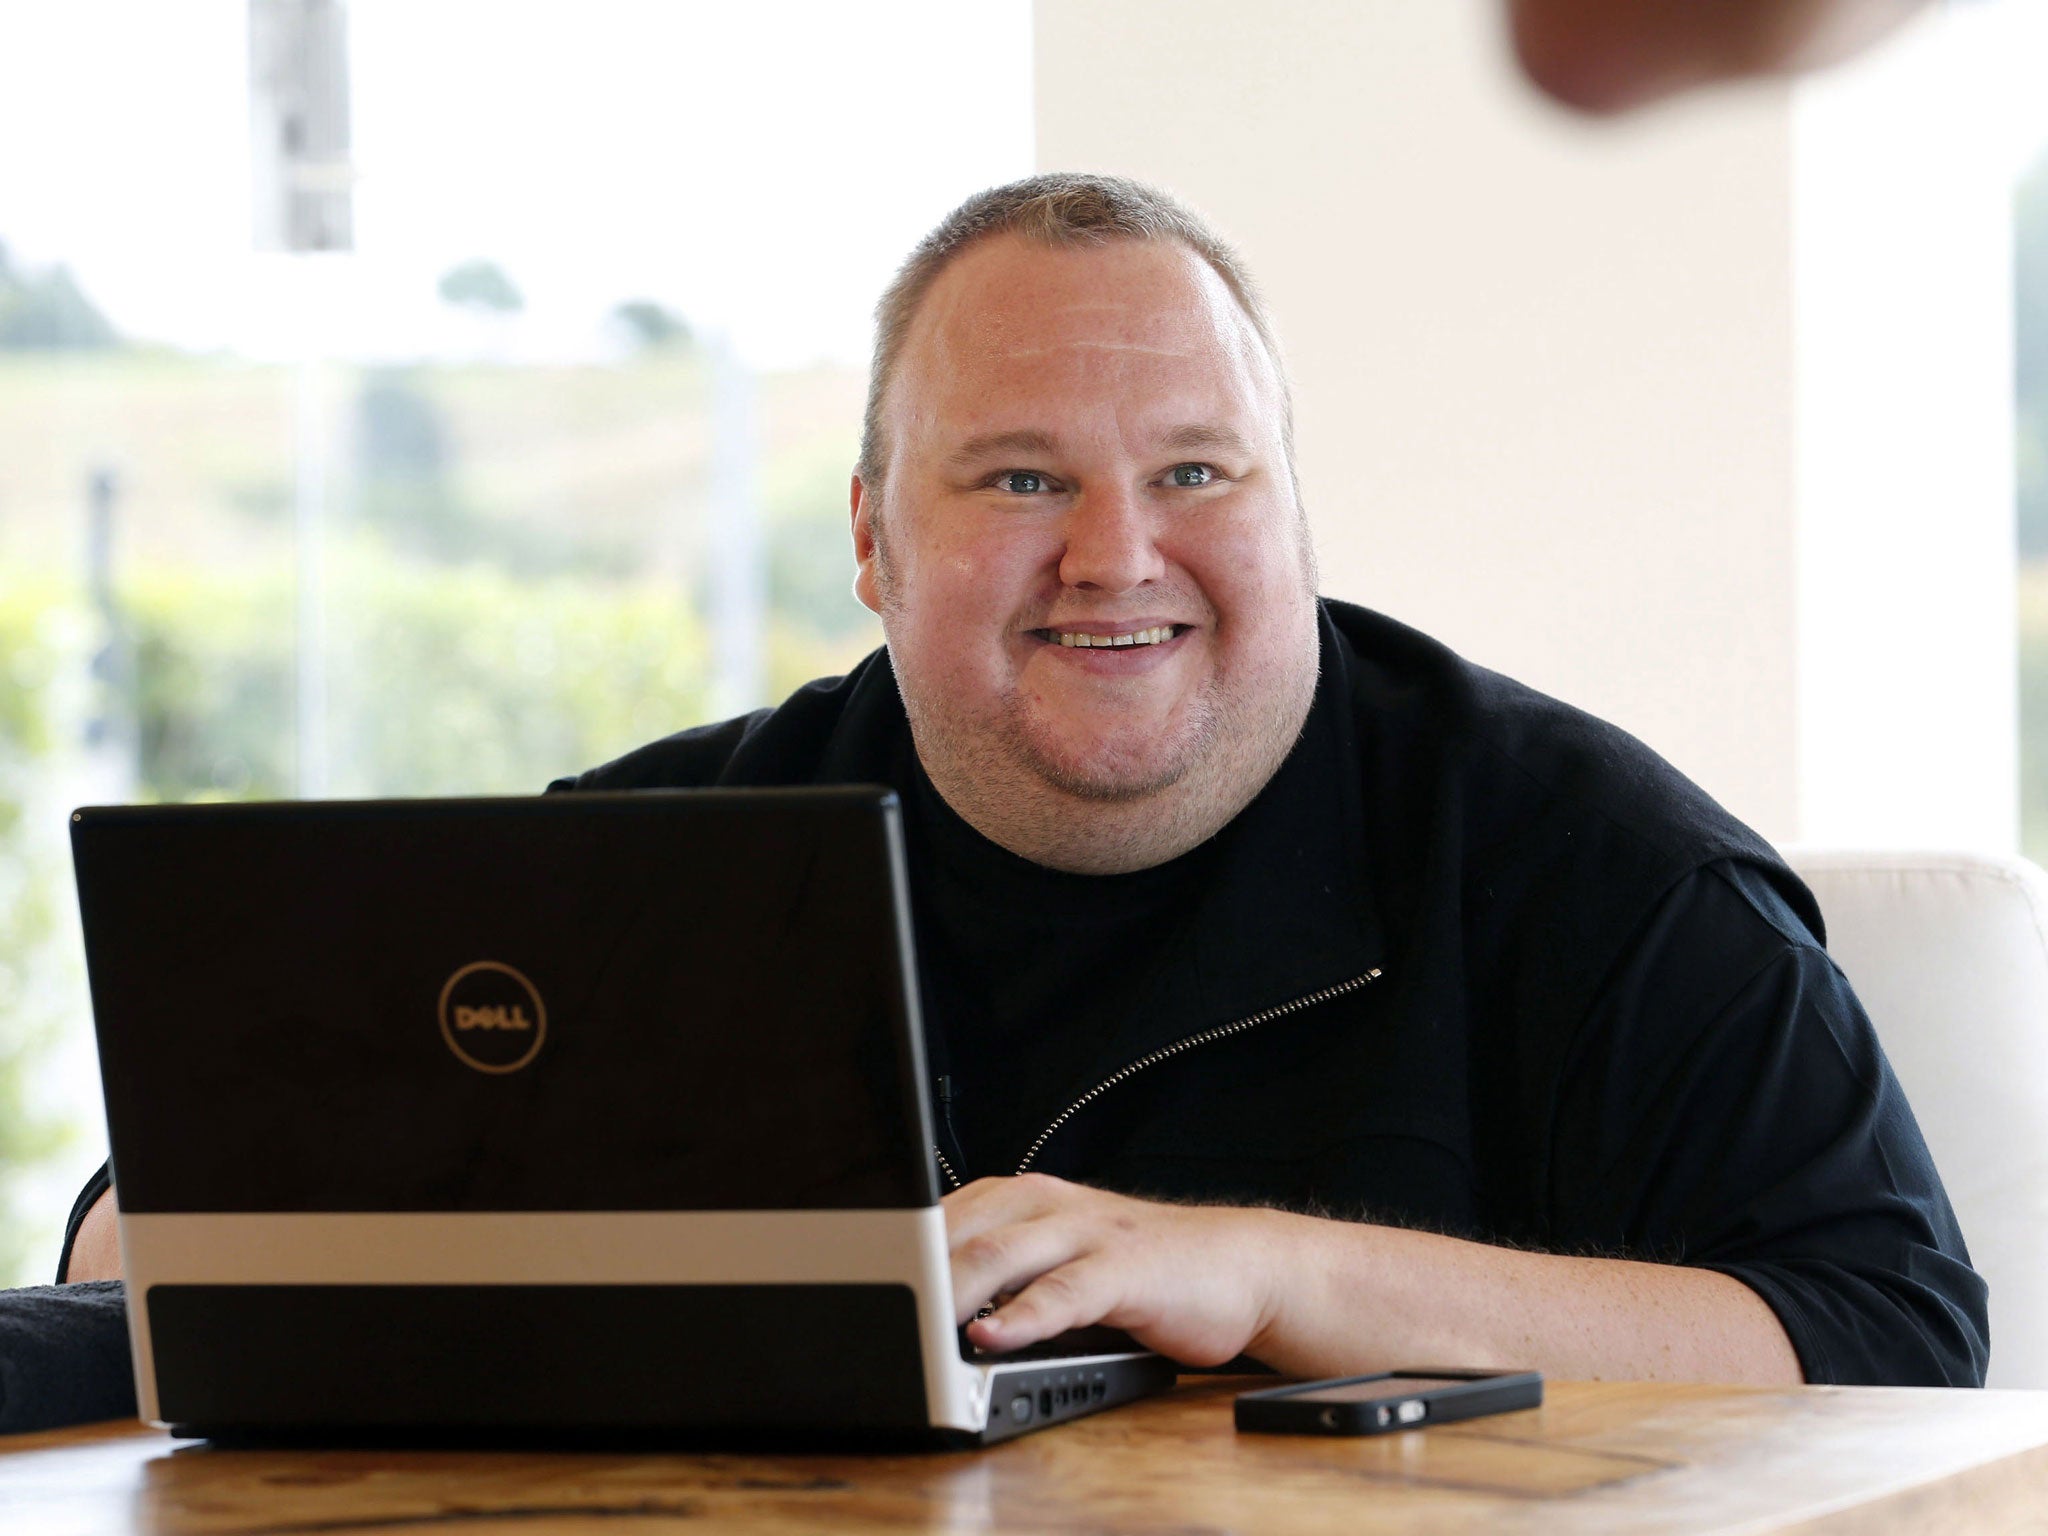 Mr Dotcom has consistently denied claims that his file-hosting websites infringed copyright laws